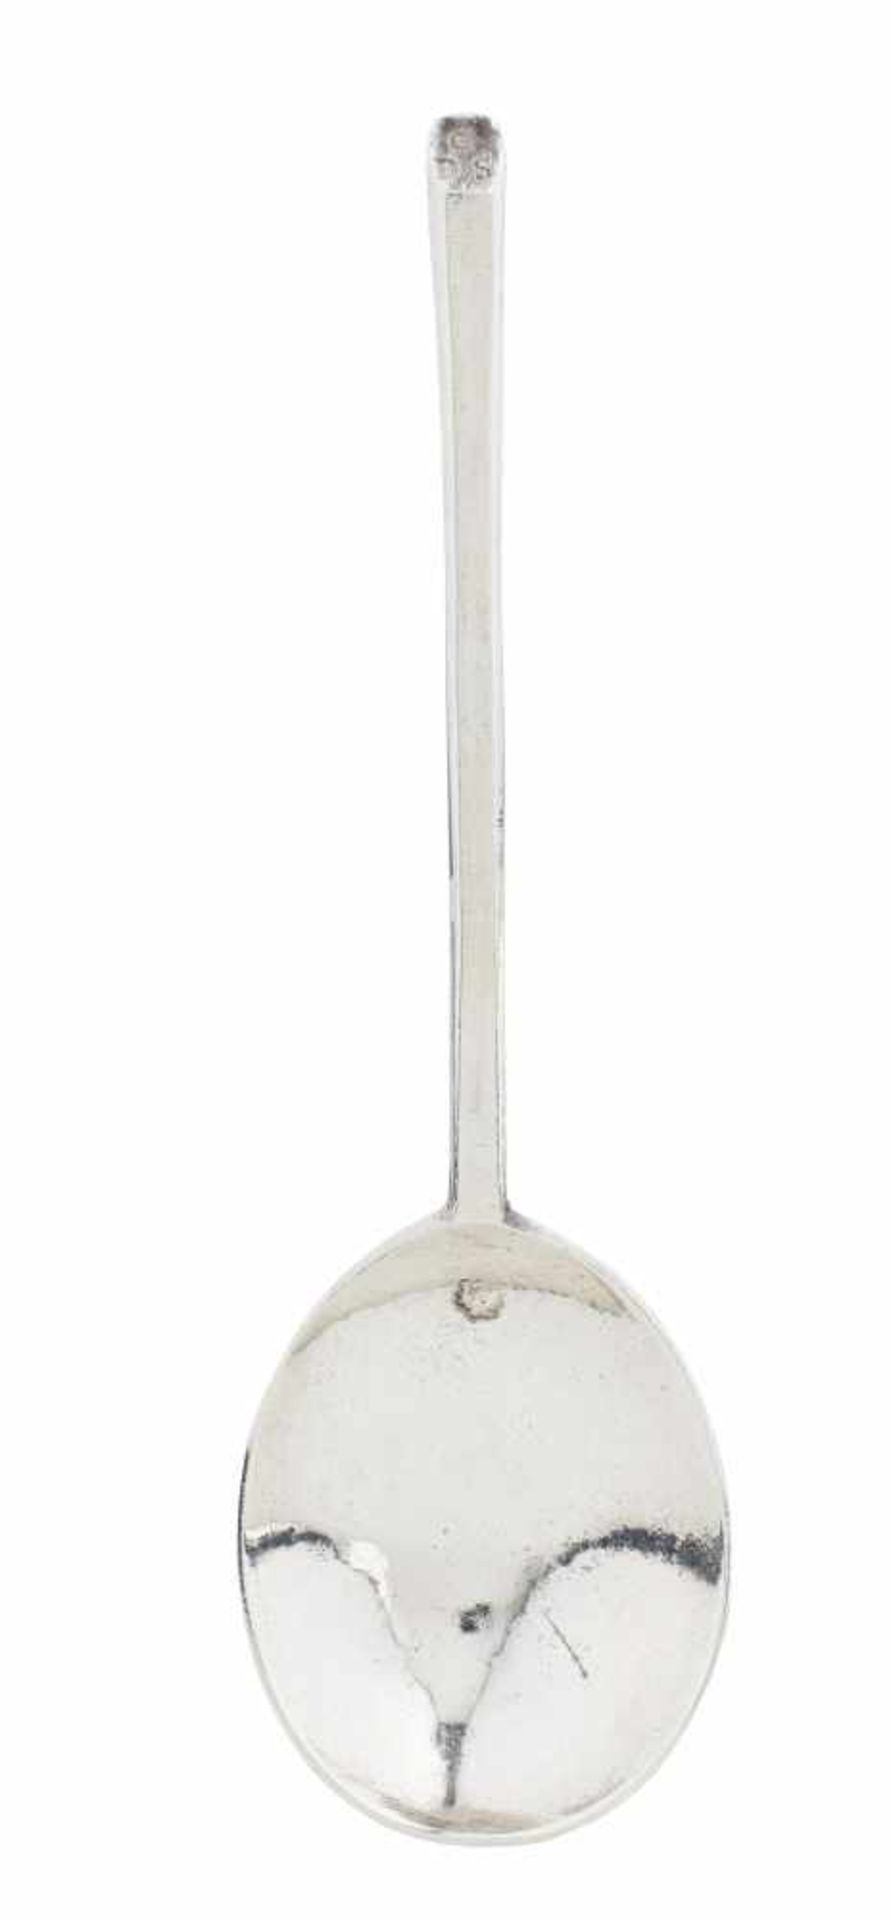 COMMONWEALTH SEAL-TOP SILVER SPOON.